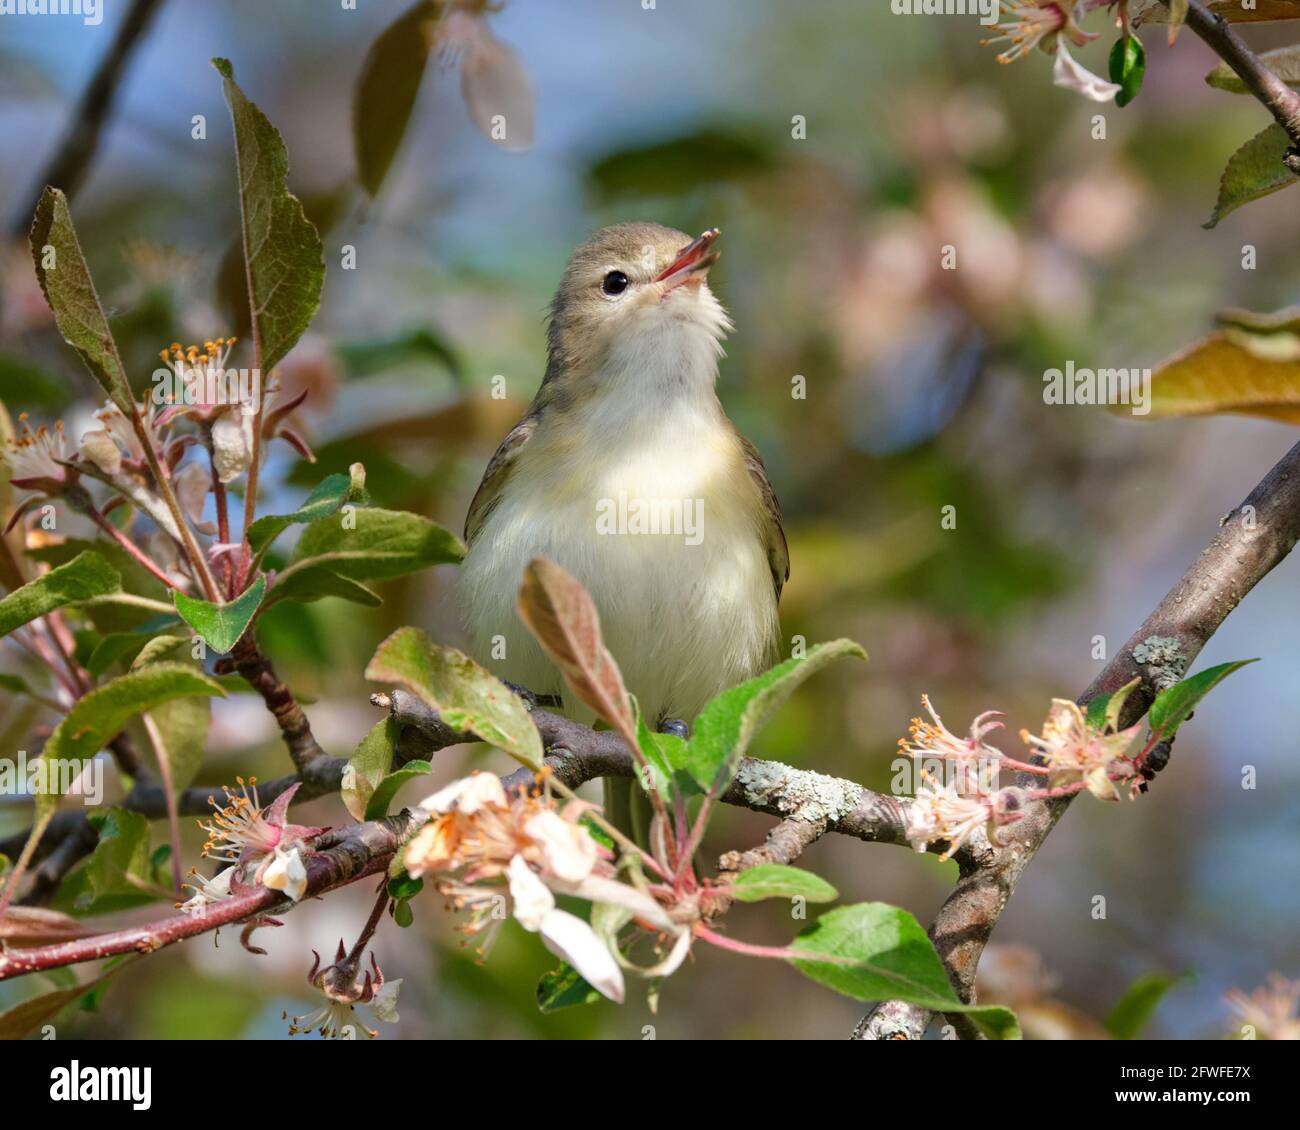 Adult Warbling Vireo, Vireo gilvus, perched signing in a blooming crab apple tree Stock Photo